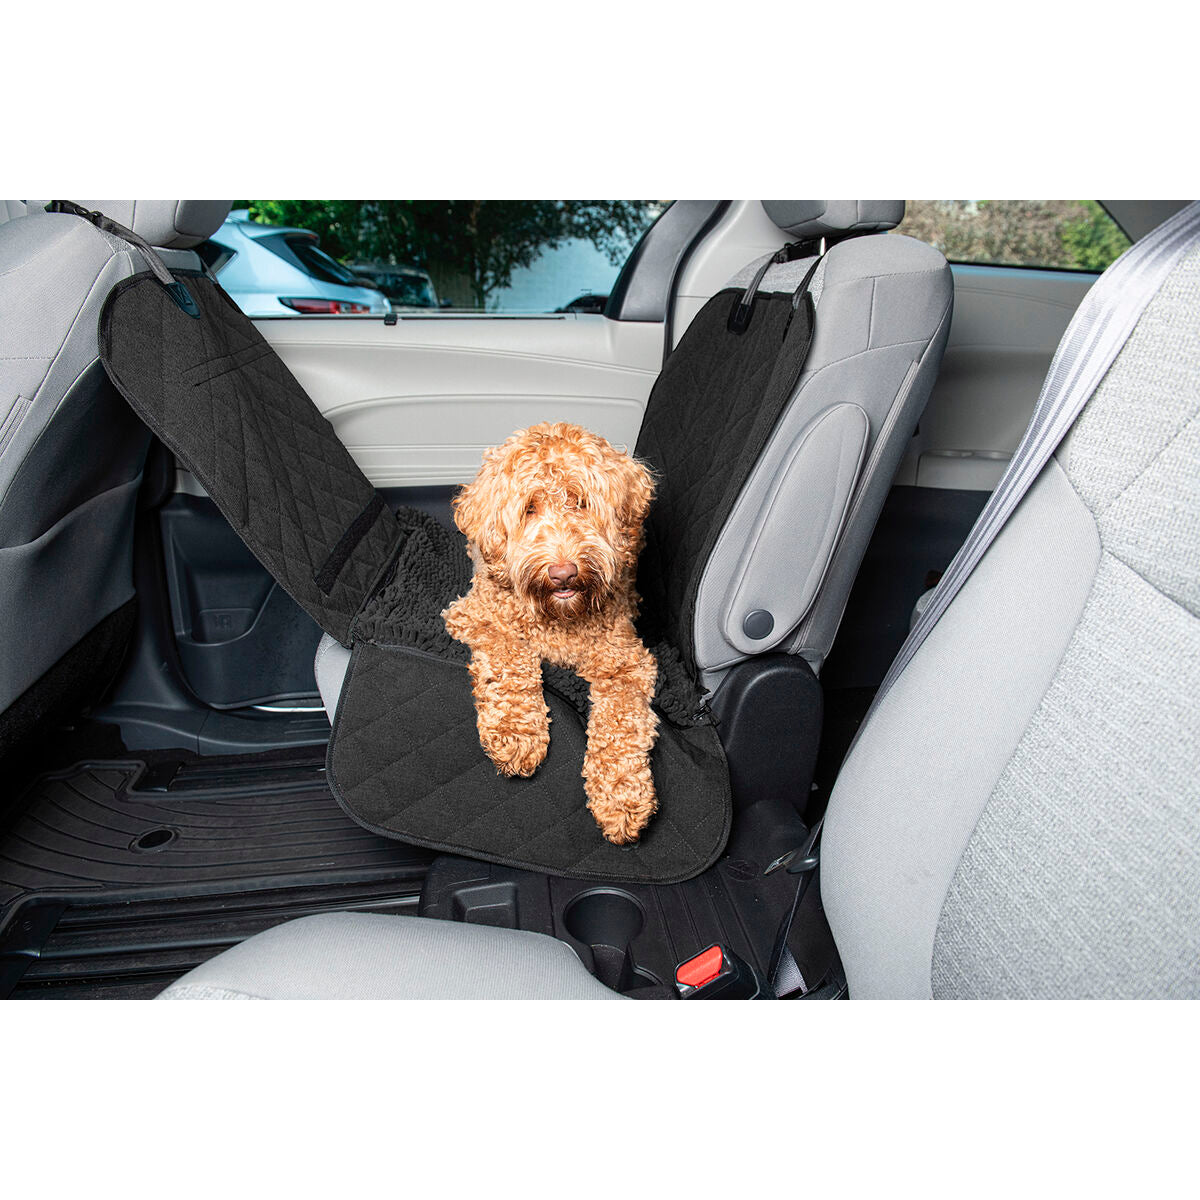 Individual Protective Car Seat Cover for Pets Dog Gone Smart 112 x 89 cm Black Plastic